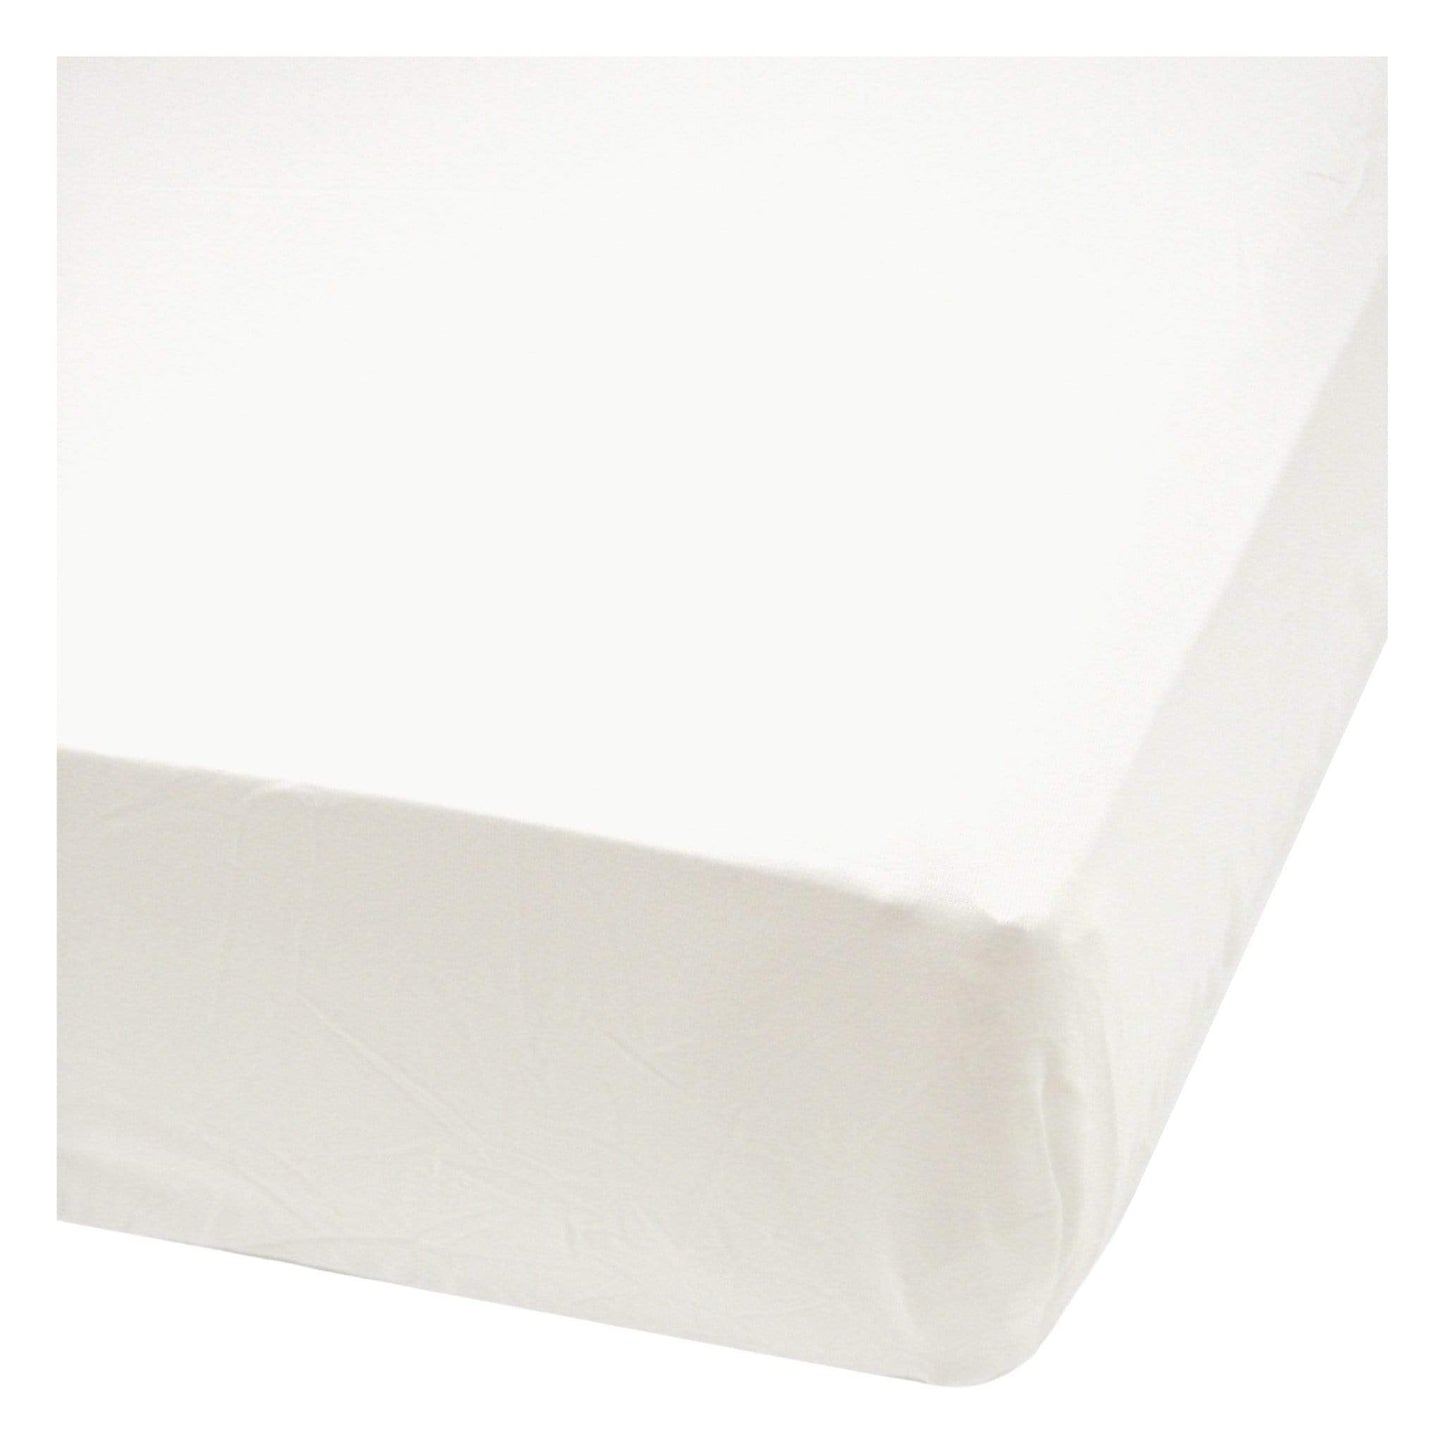 Bamboo fitted sheet - Ivory